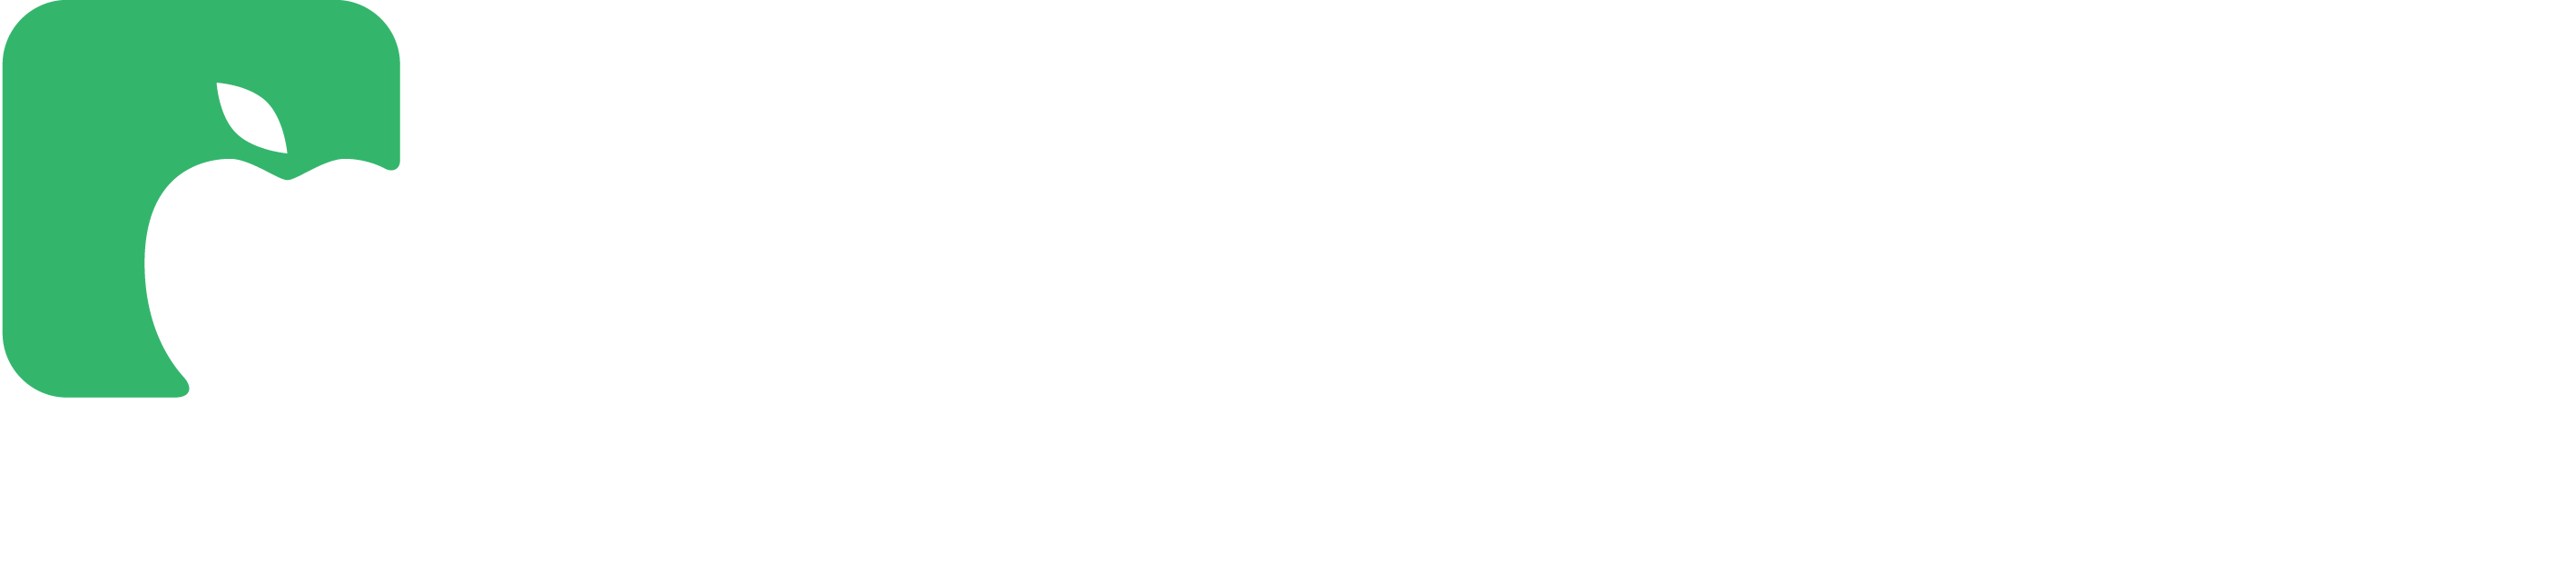 DebtorCC ONLINE CREDIT COUNSELING COURSE